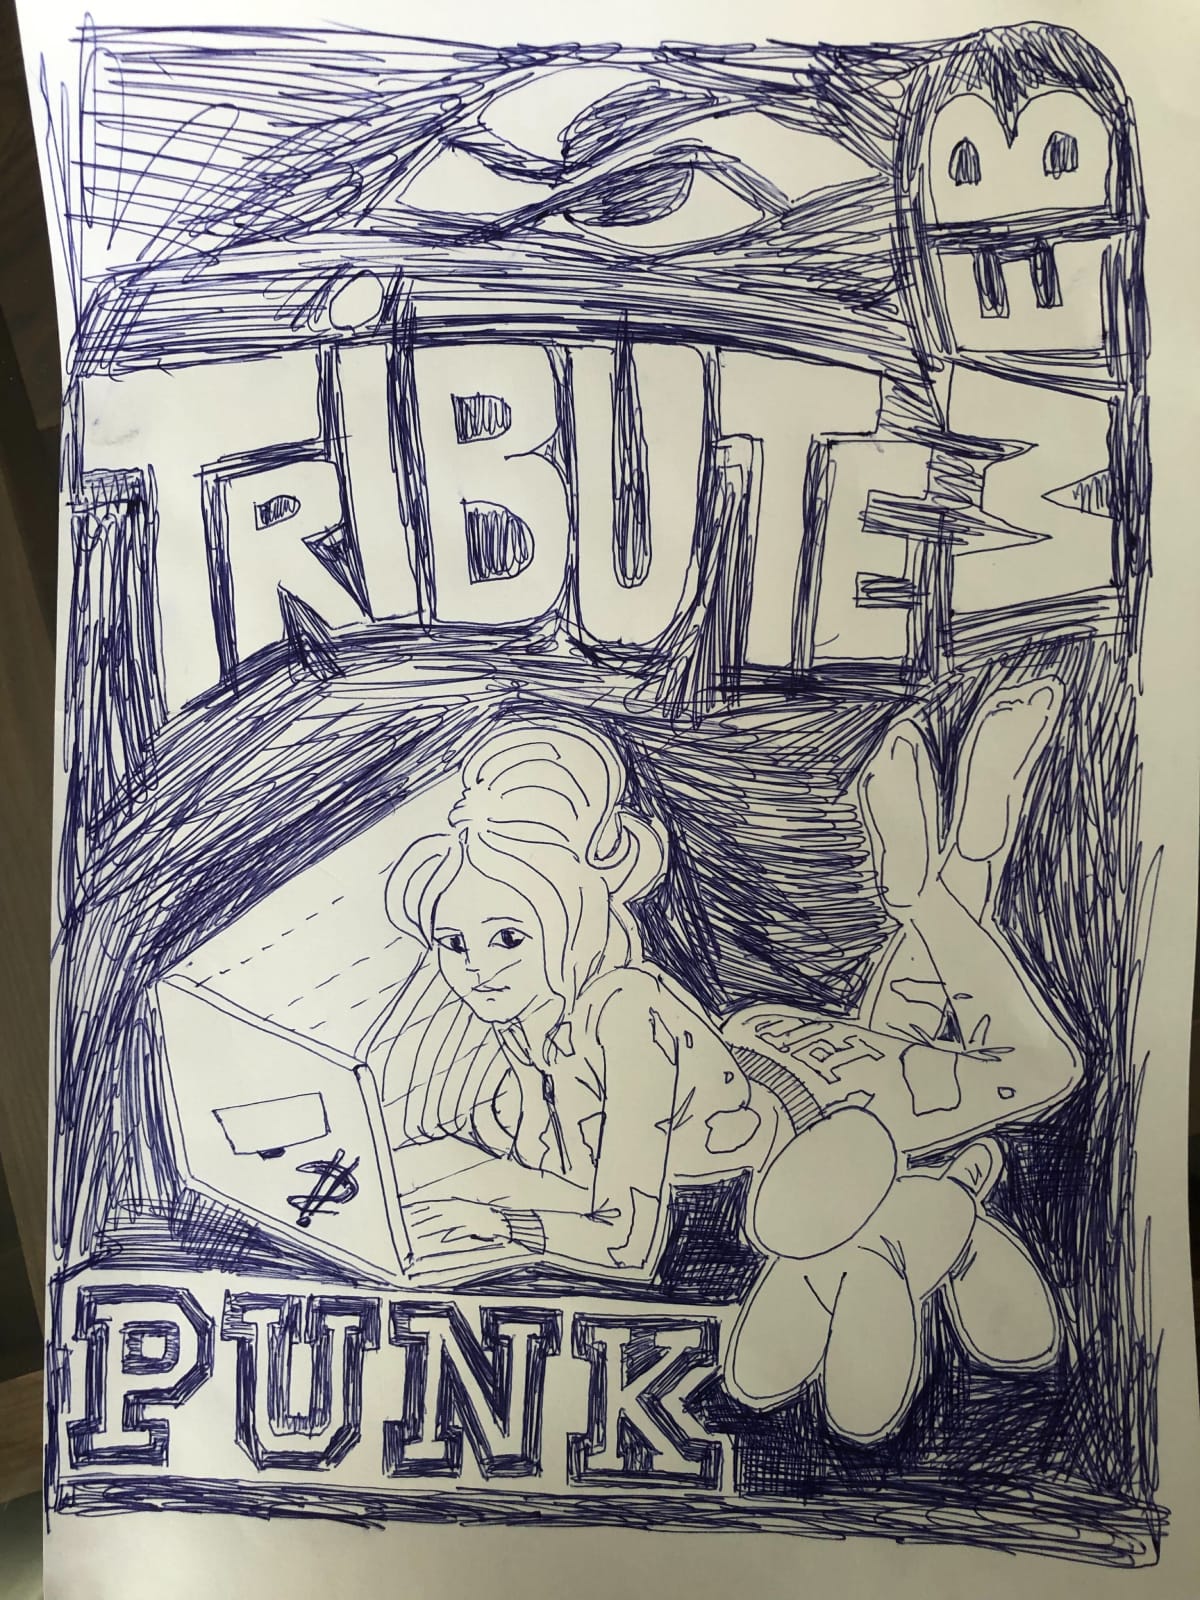 Excerpt from the PUNK zine